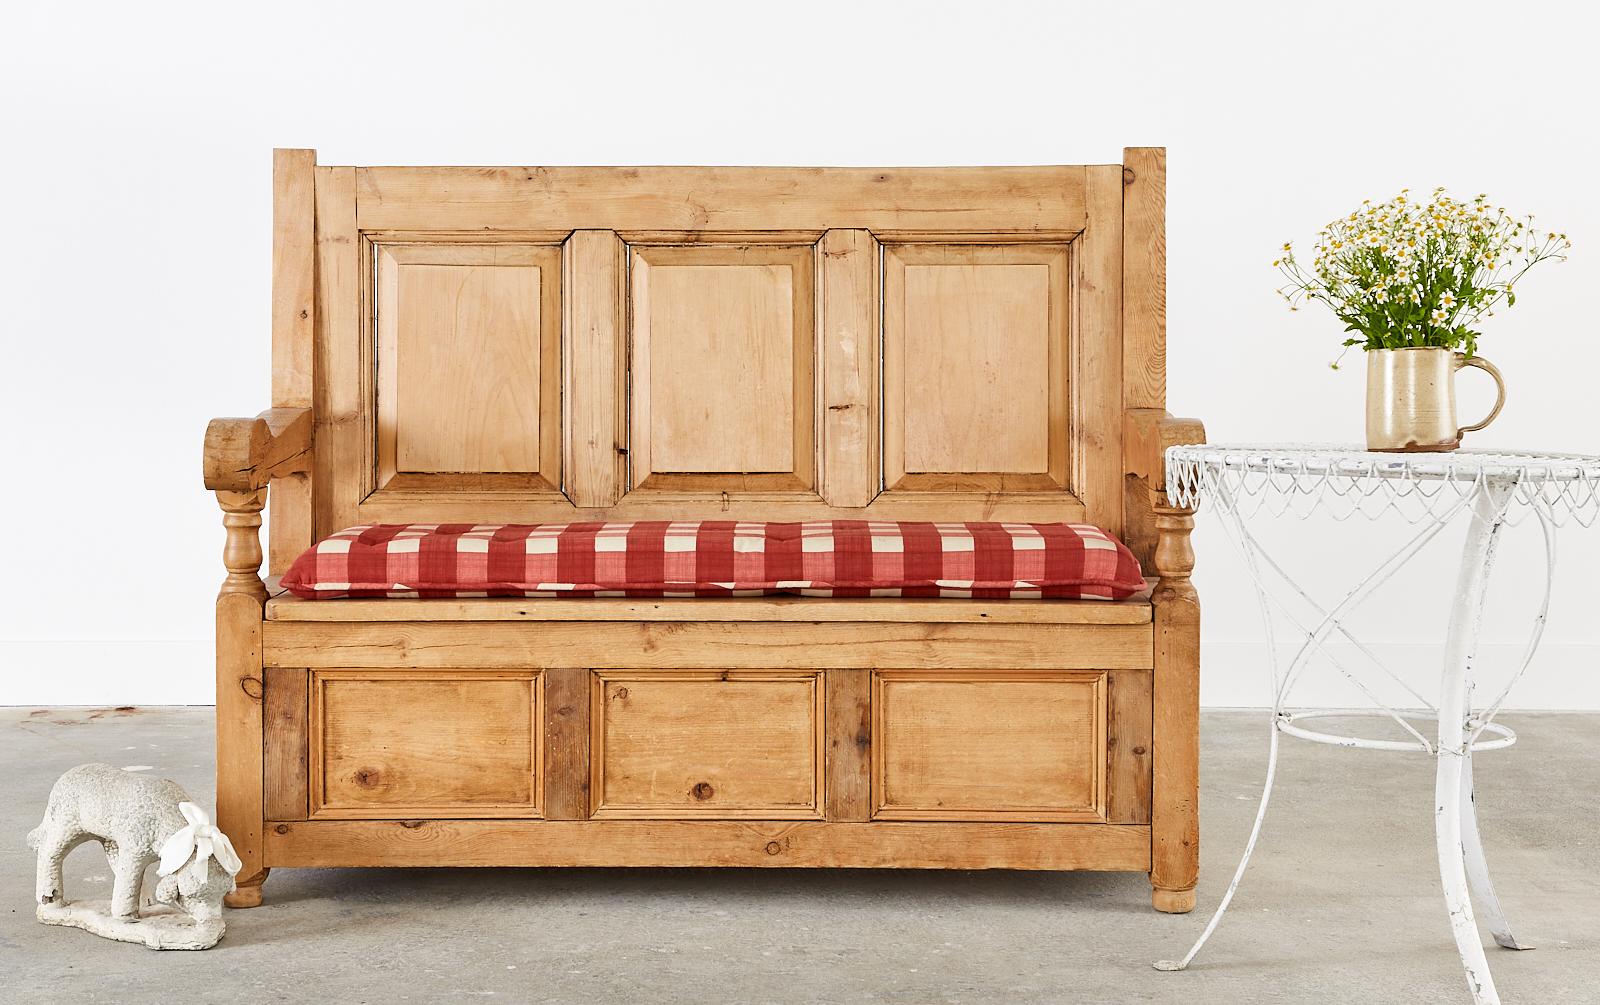 Charming and rustic country English provincial farmhouse settle bench seat or settee crafted from pine. The bench is constructed with peg joinery and has decorative panels on three sides. The arms and legs have thick, chunky proportions measuring